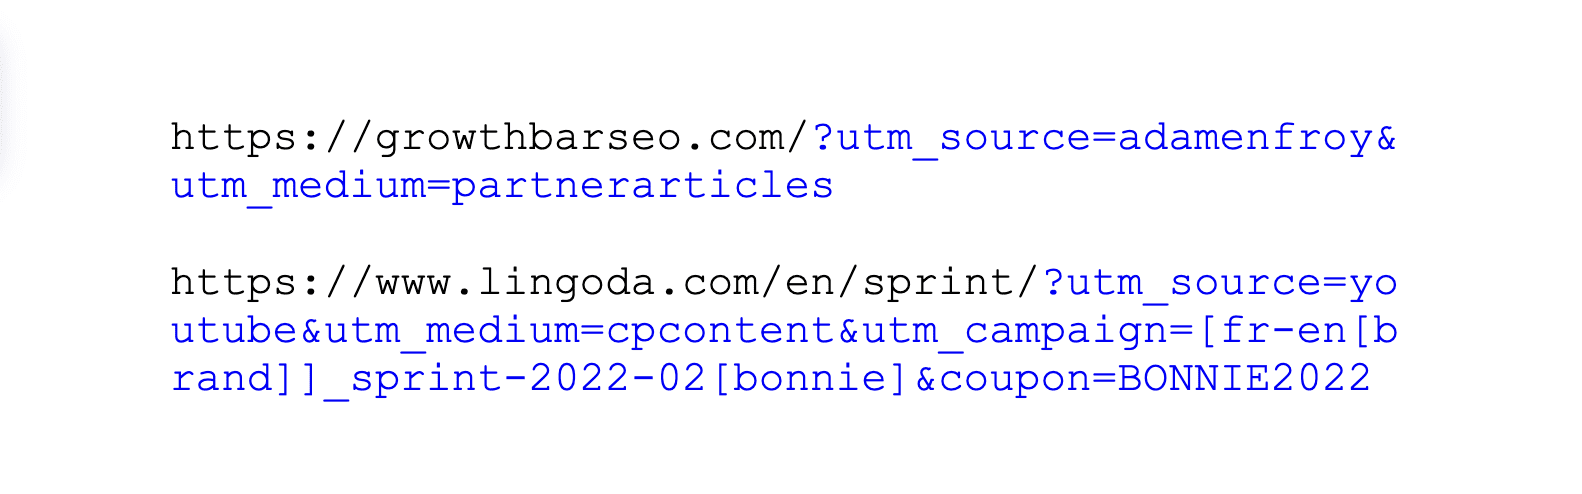 Links with UTM tags